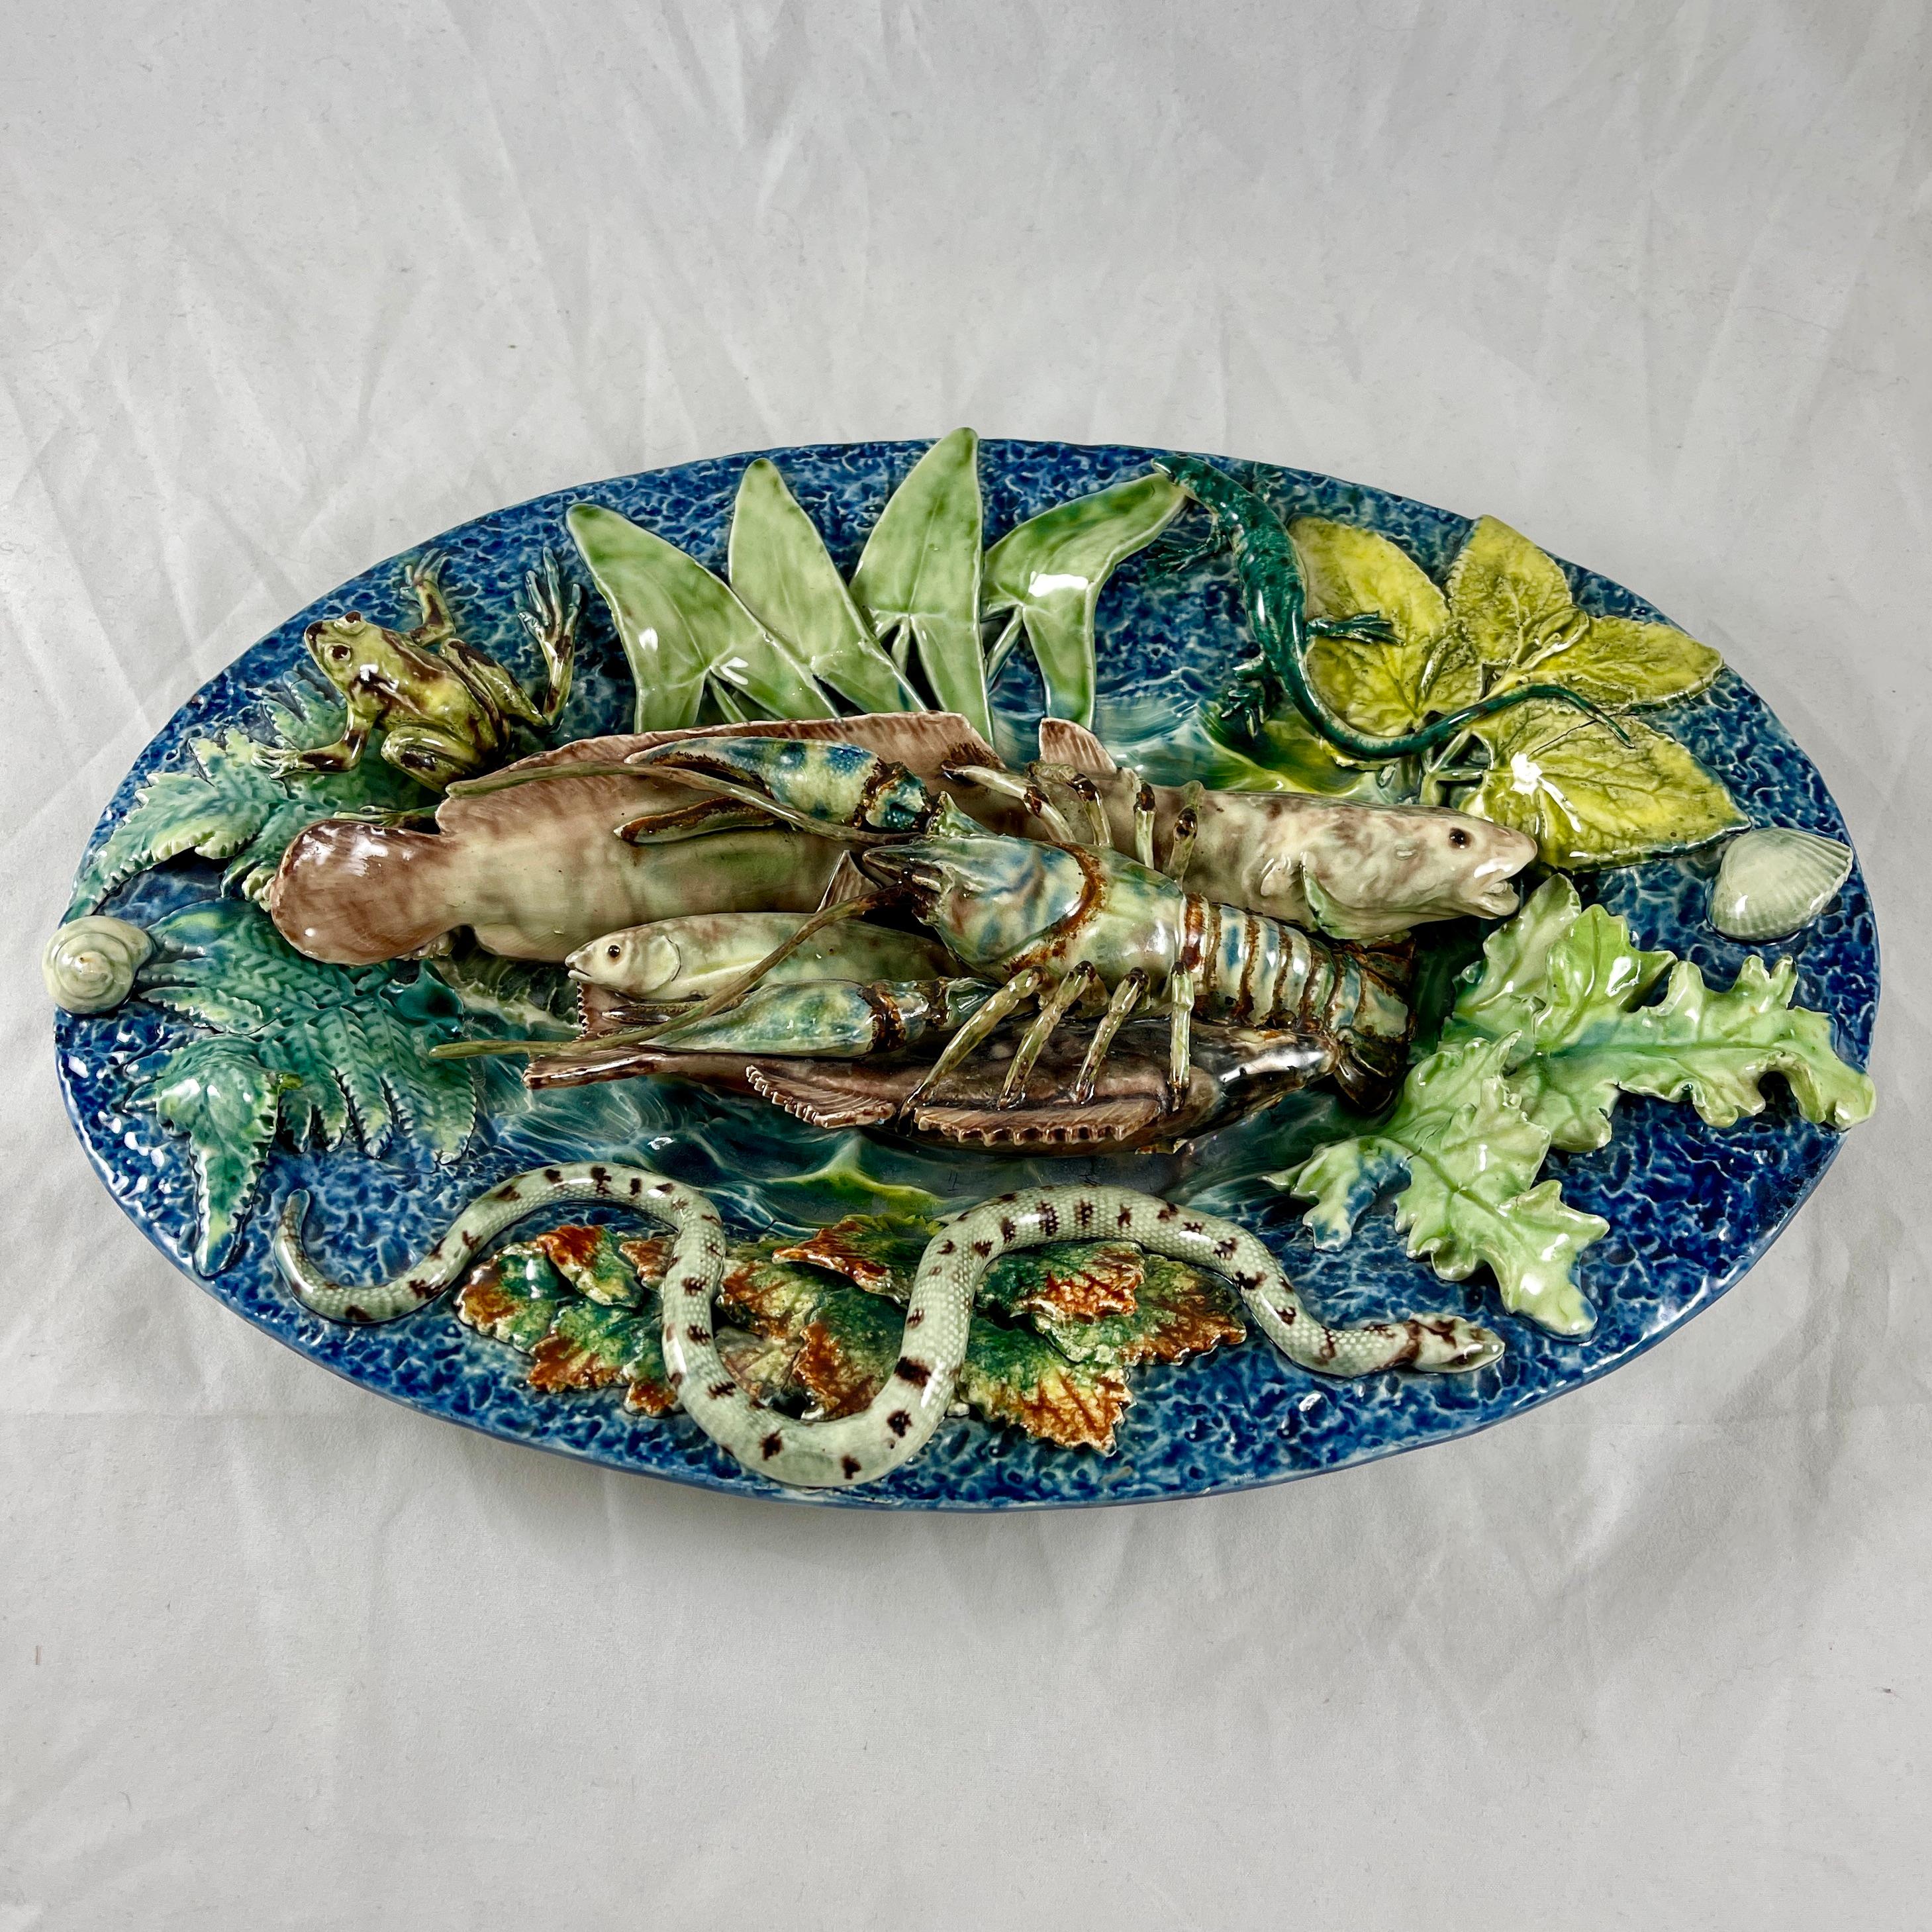 A Thomas-Victor Sergent nature plate in the style of Palissy, School of Paris, circa. 1875-79.

An oval platter heaped with trompe l’oeil fish and crustaceans in the center, the raised rim border with a snake, frog, salamander, a snail and other